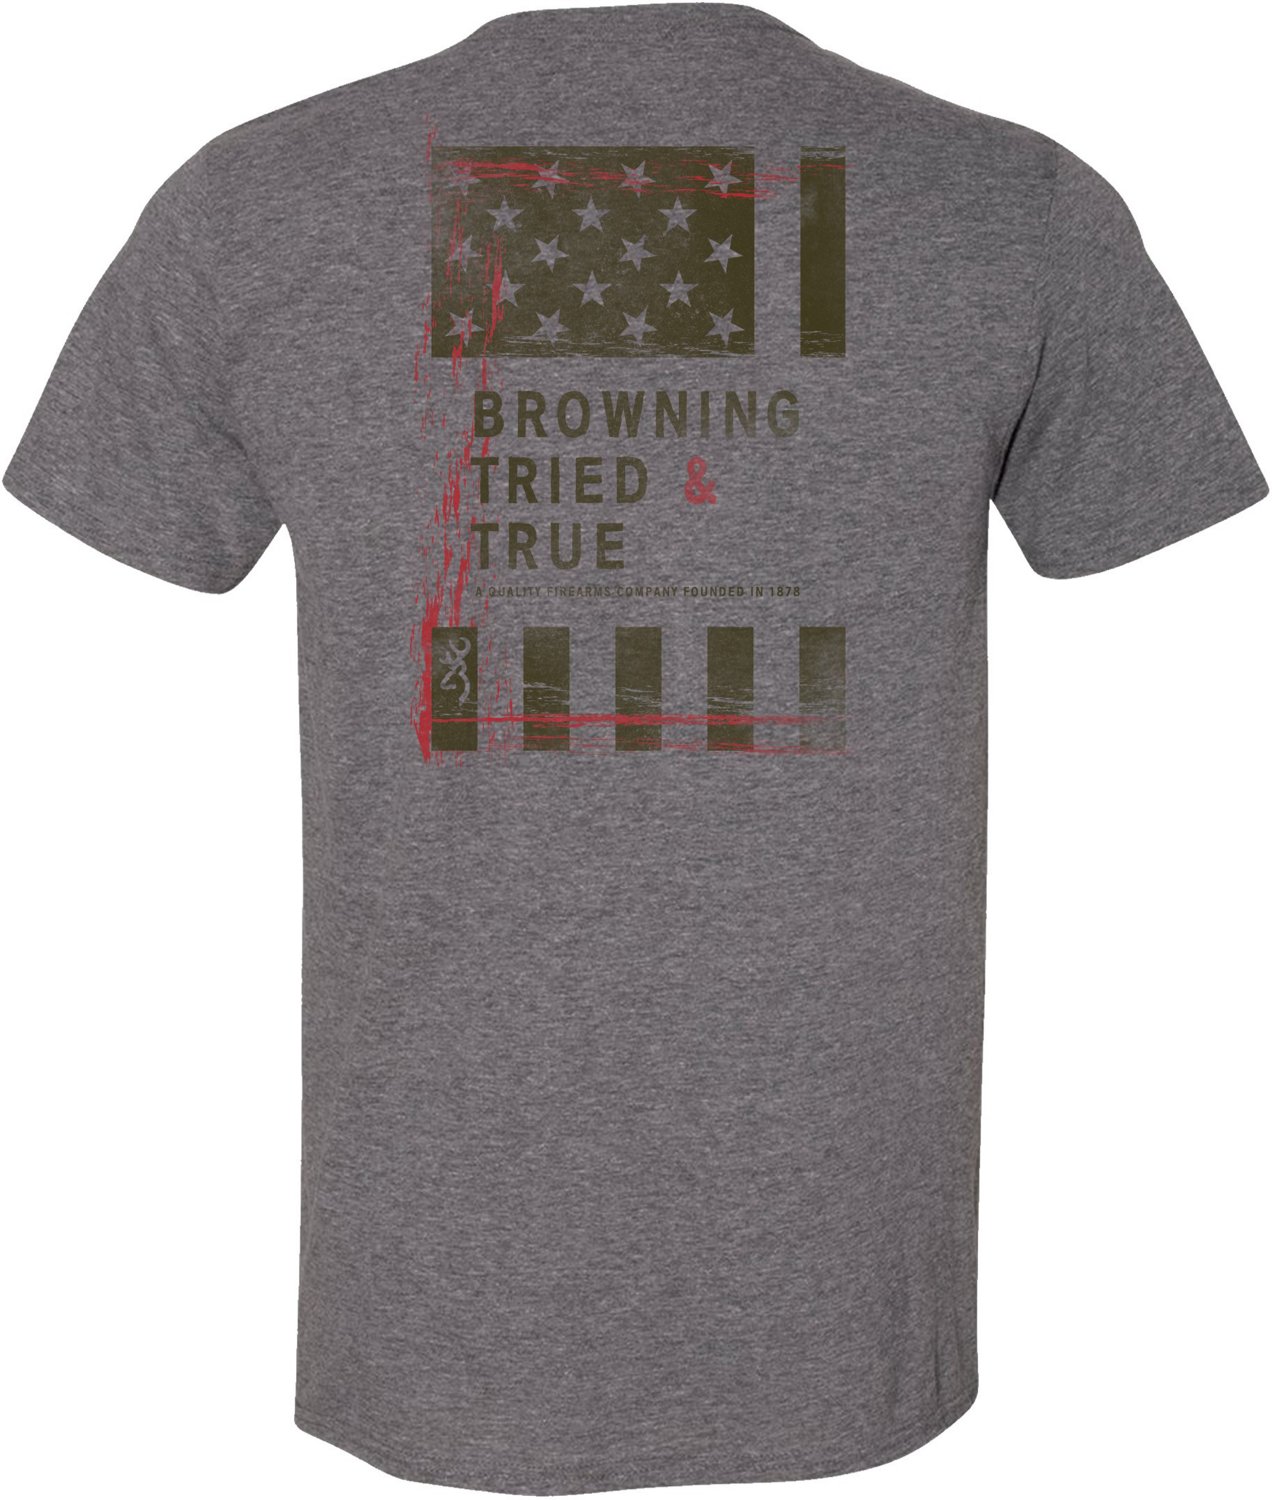 Browning Men's Tried and True Short Sleeve T-shirt | Academy